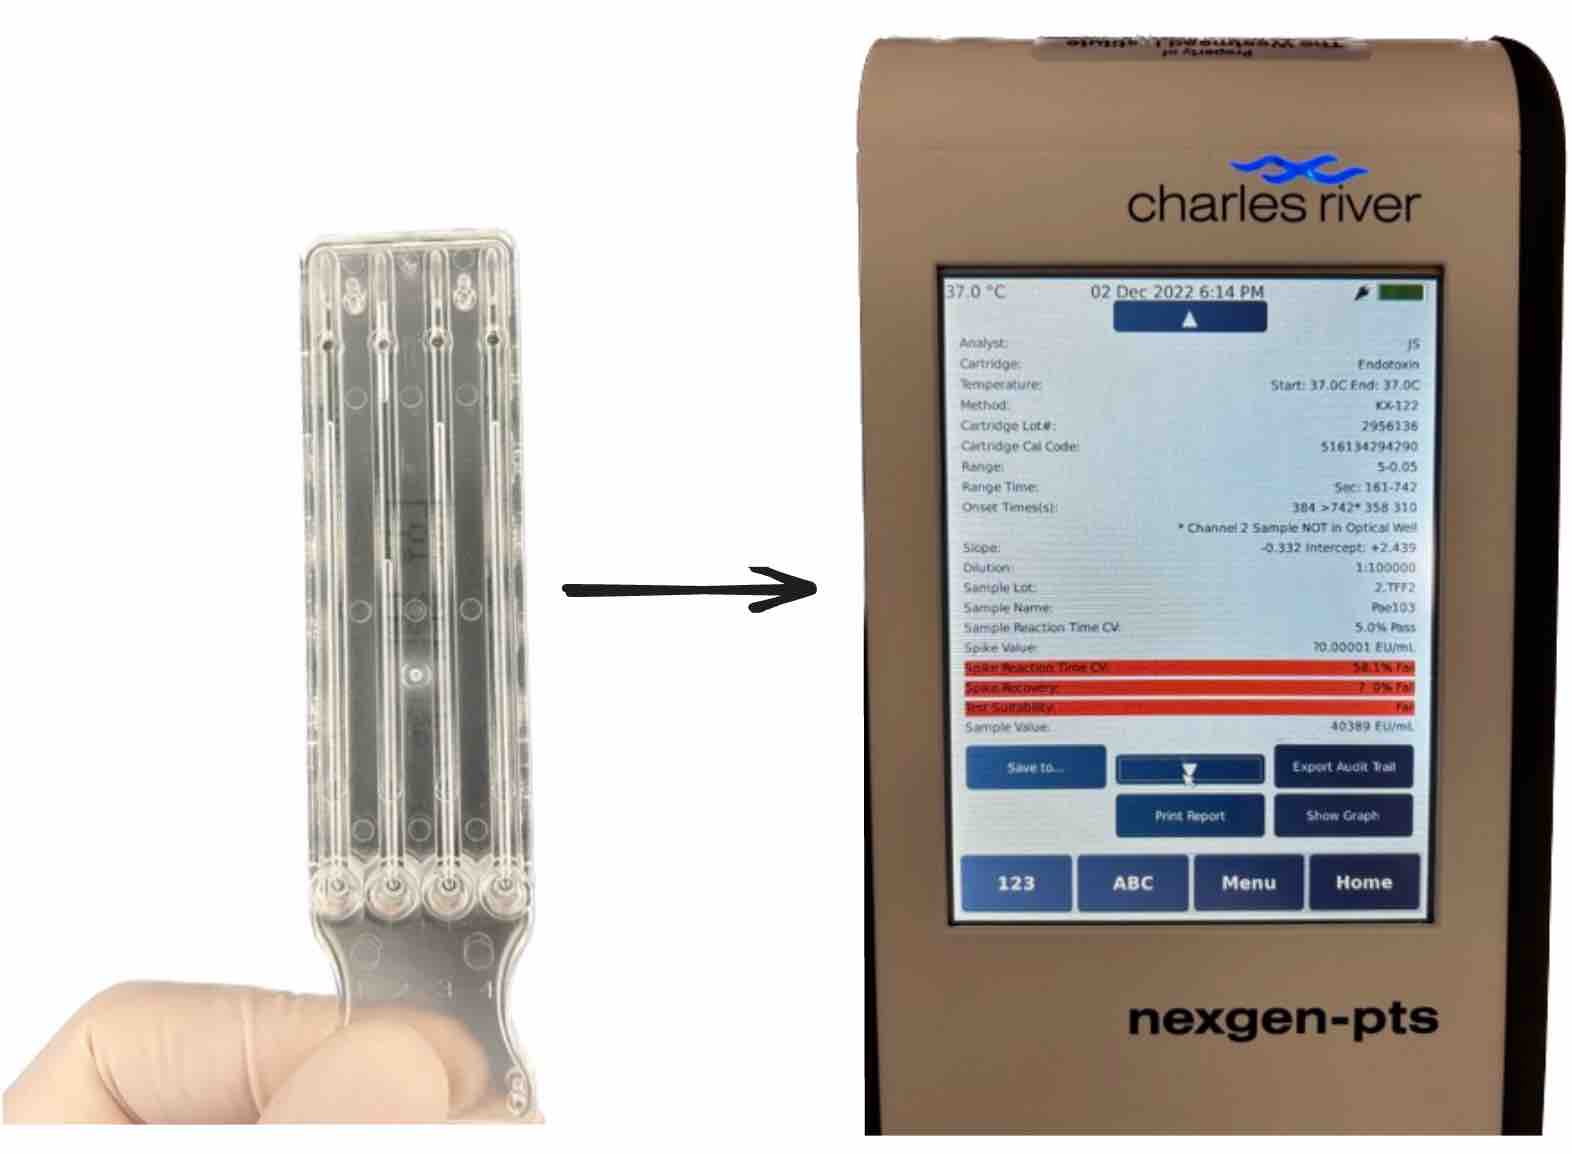 Figure 3. This is the endotoxin reader system we use: you pipette 25 uL x 4 into the wells at the bottom of a plastic cartridge, then insert it into the reader, which gives you a readout. It has internal standards built in, and as you can see in the above, this one failed.